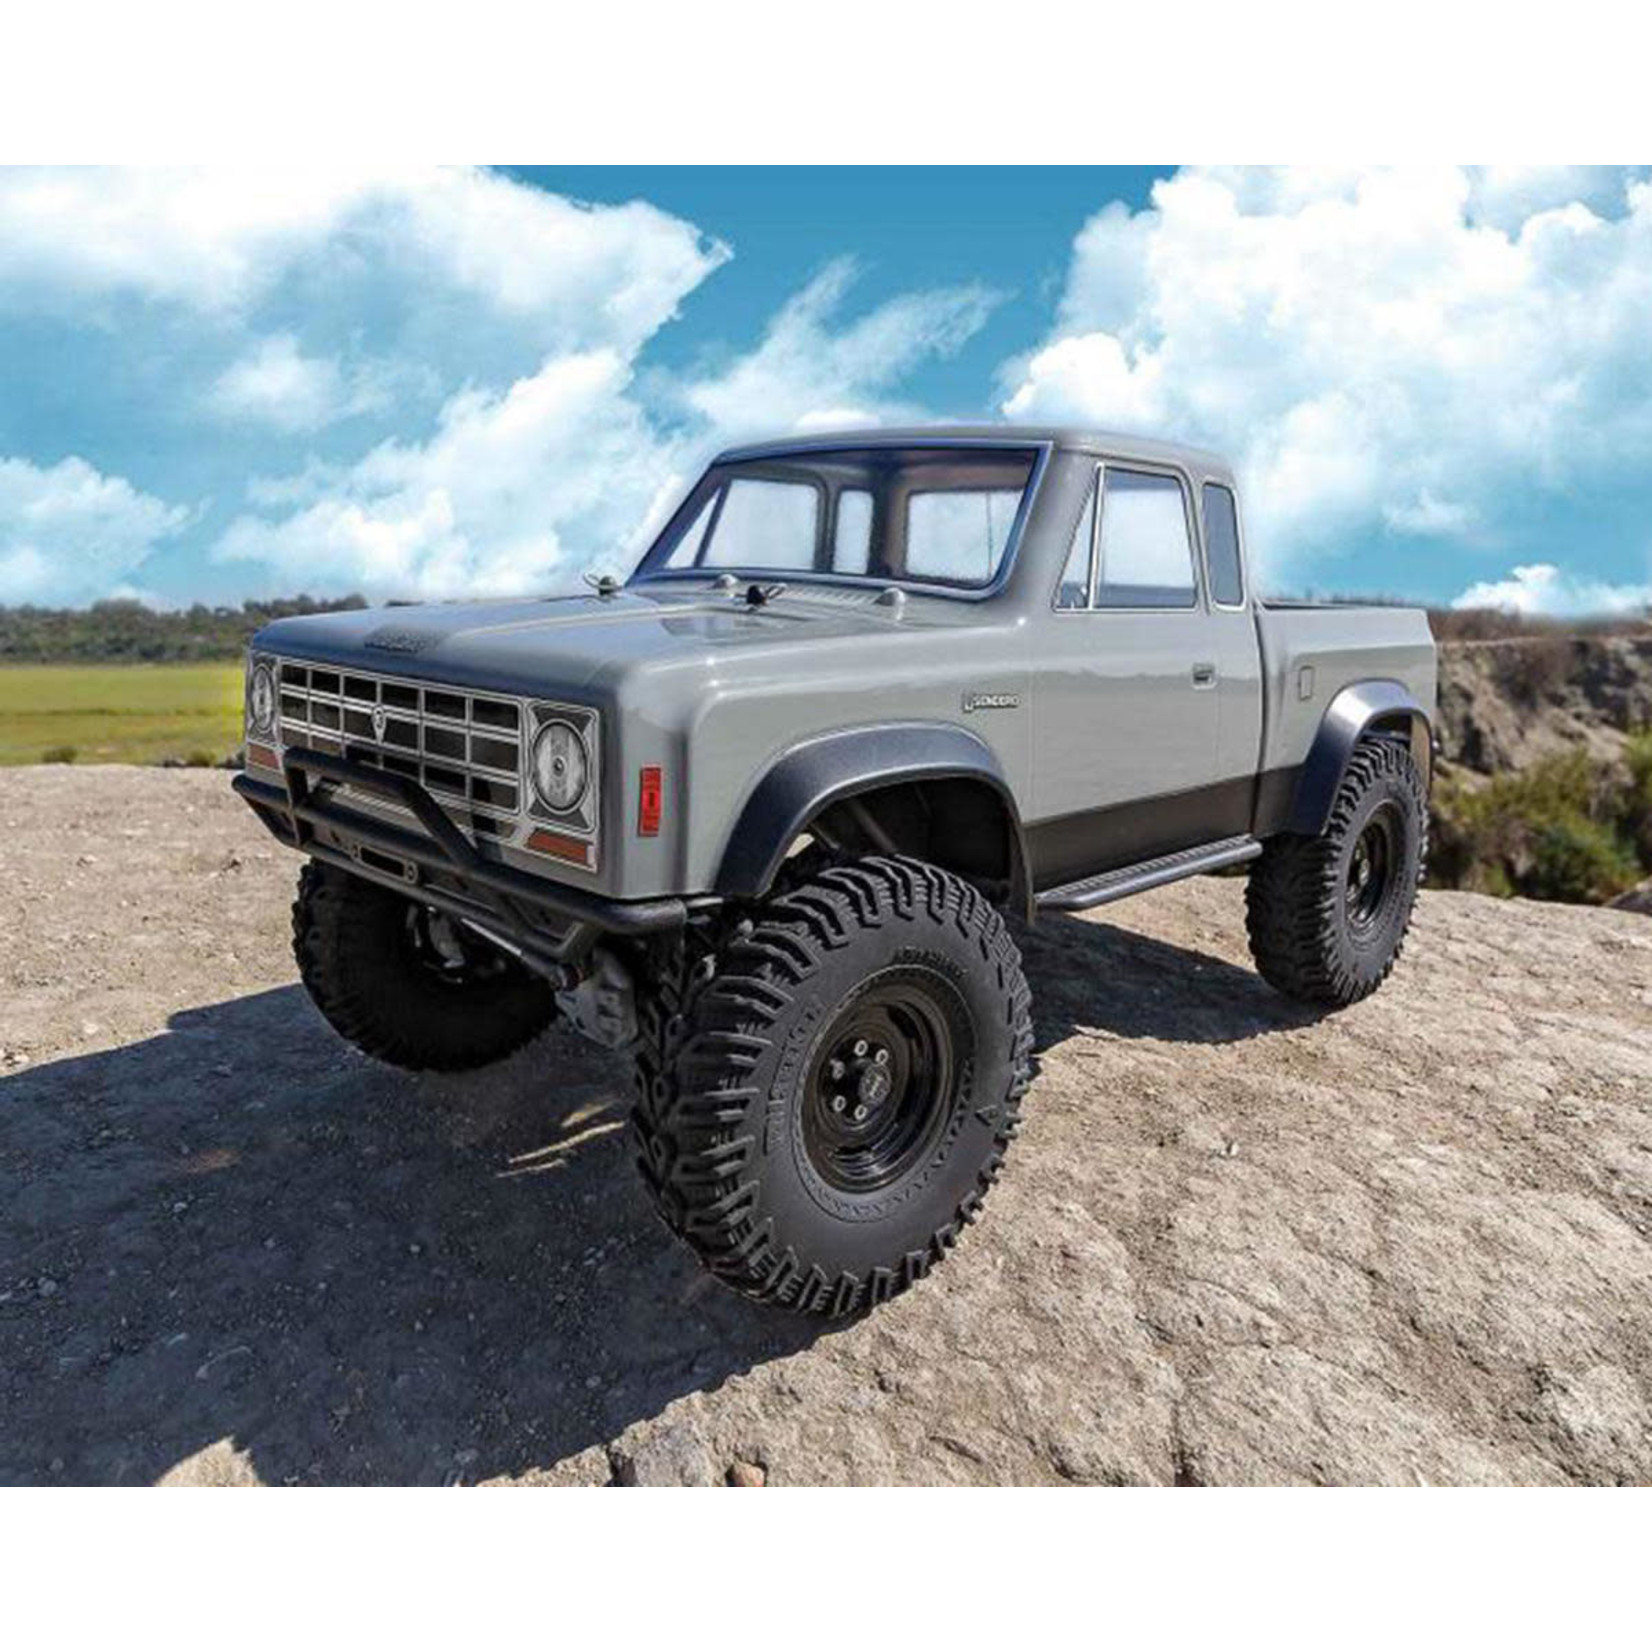 Element RC Element RC Enduro SE Sendero 4X4 RTR 1/10 Trail Truck (Grey) Combo w/2.4GHz Radio, Battery & Charger